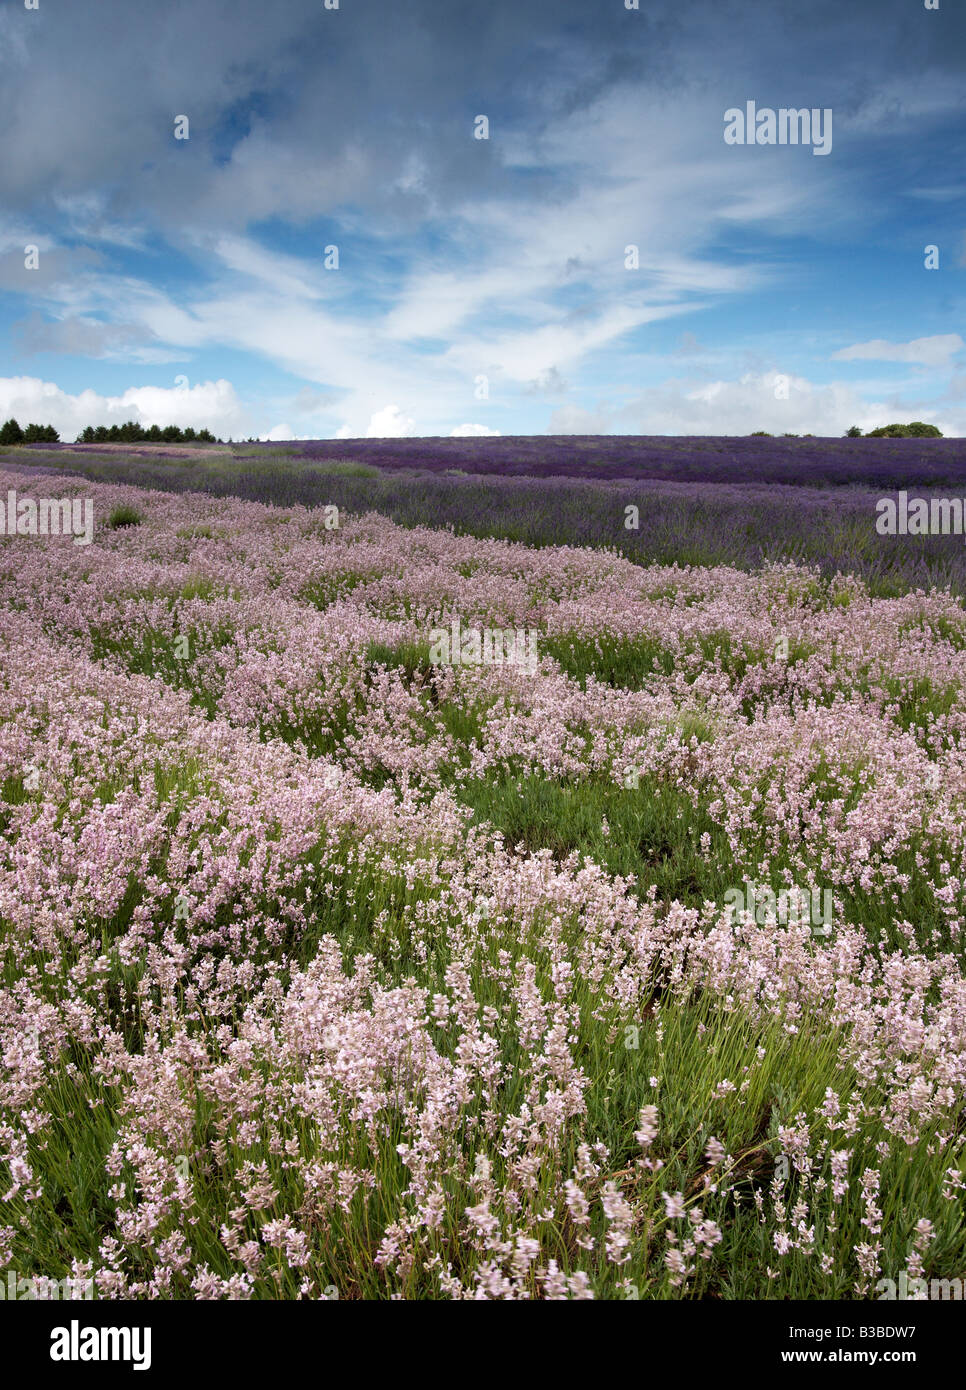 Different types of lavender at Snowshill Lavender Farm Gloucestershire England UK Stock Photo